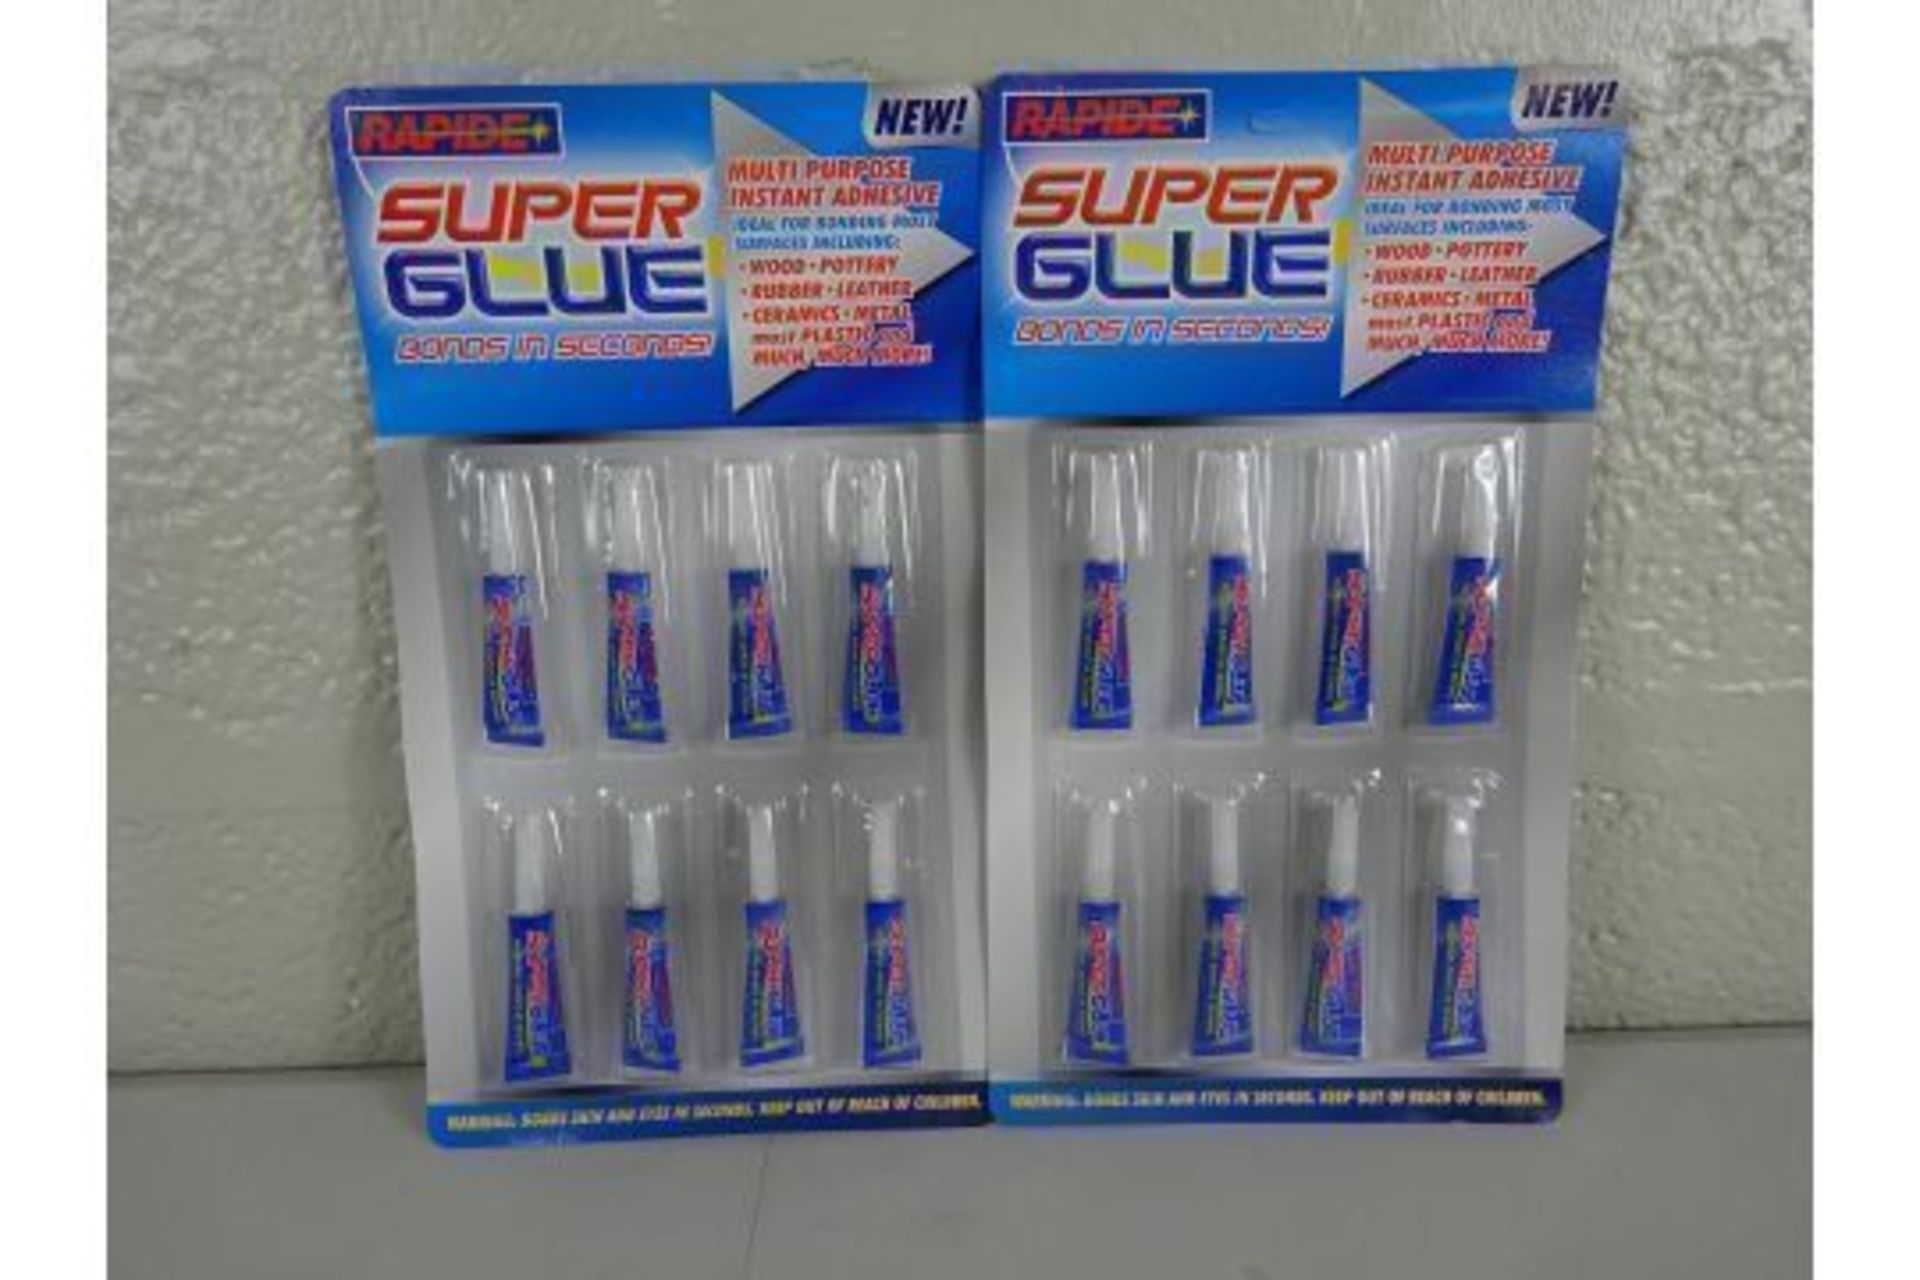 X2 PACKS OF RAPIDE - PREMIUM QUALITY SUPER GLUE STRONG ADHESIVE